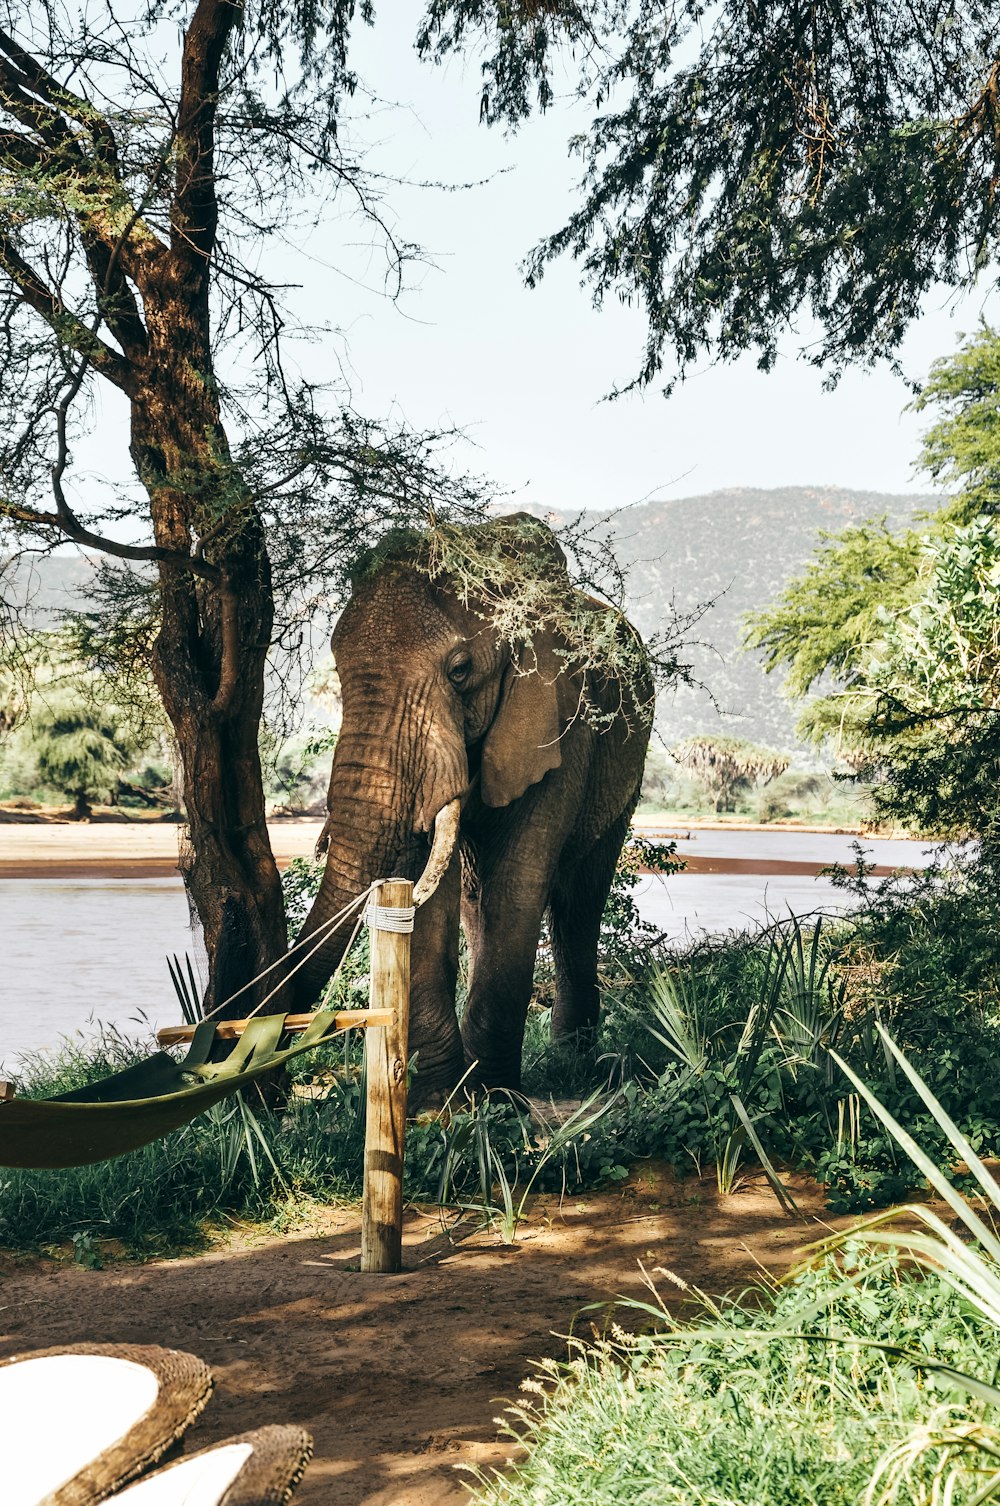 brown elephant standing beside tree near body of water during daytime